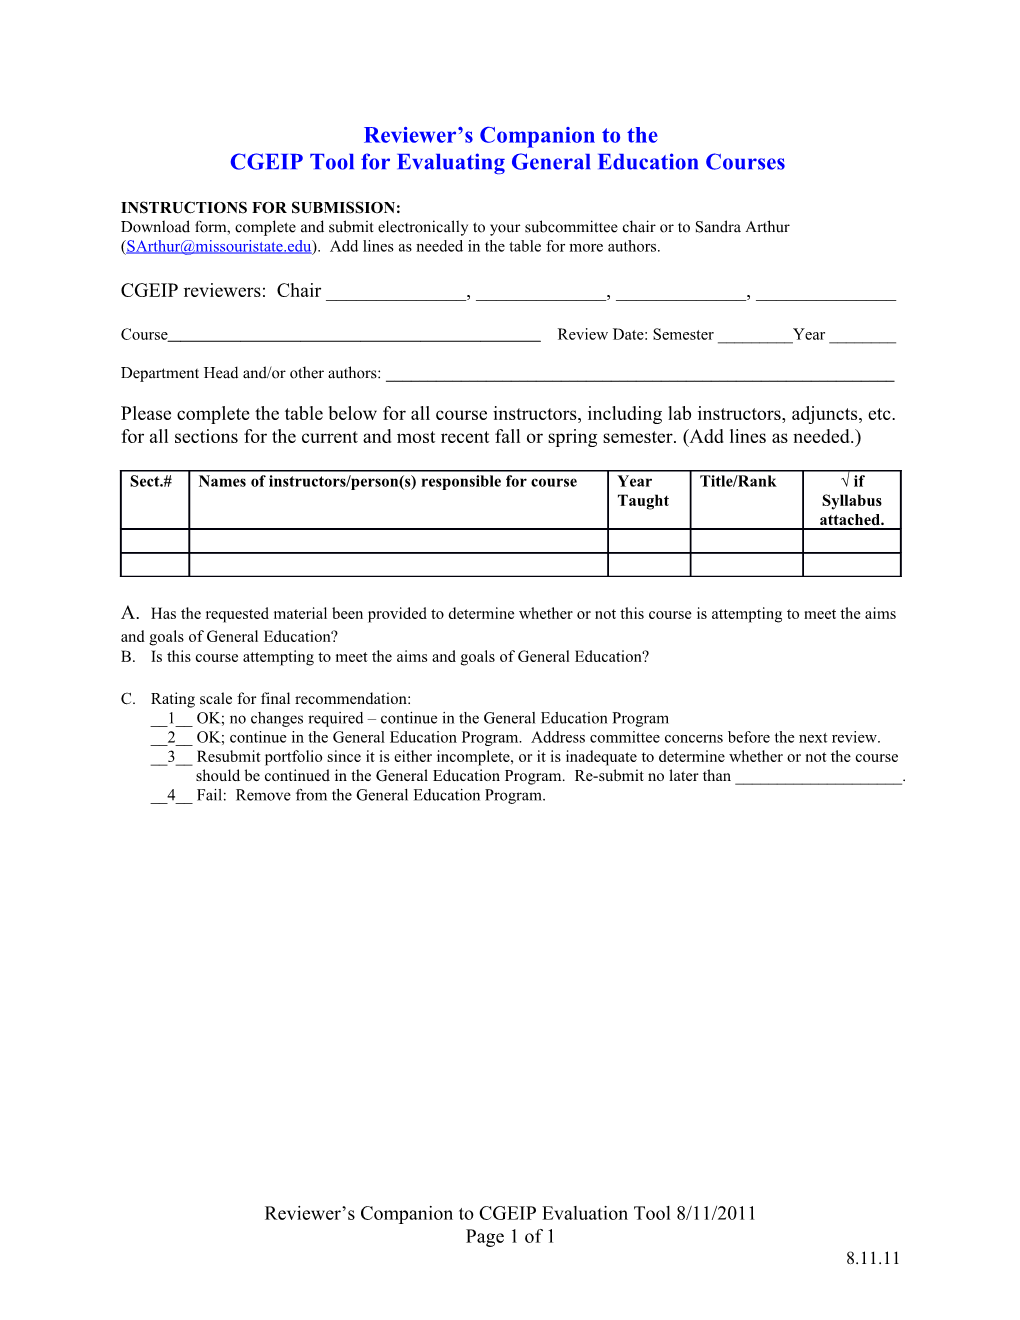 CGEIP Tool for Evaluating General Education Courses